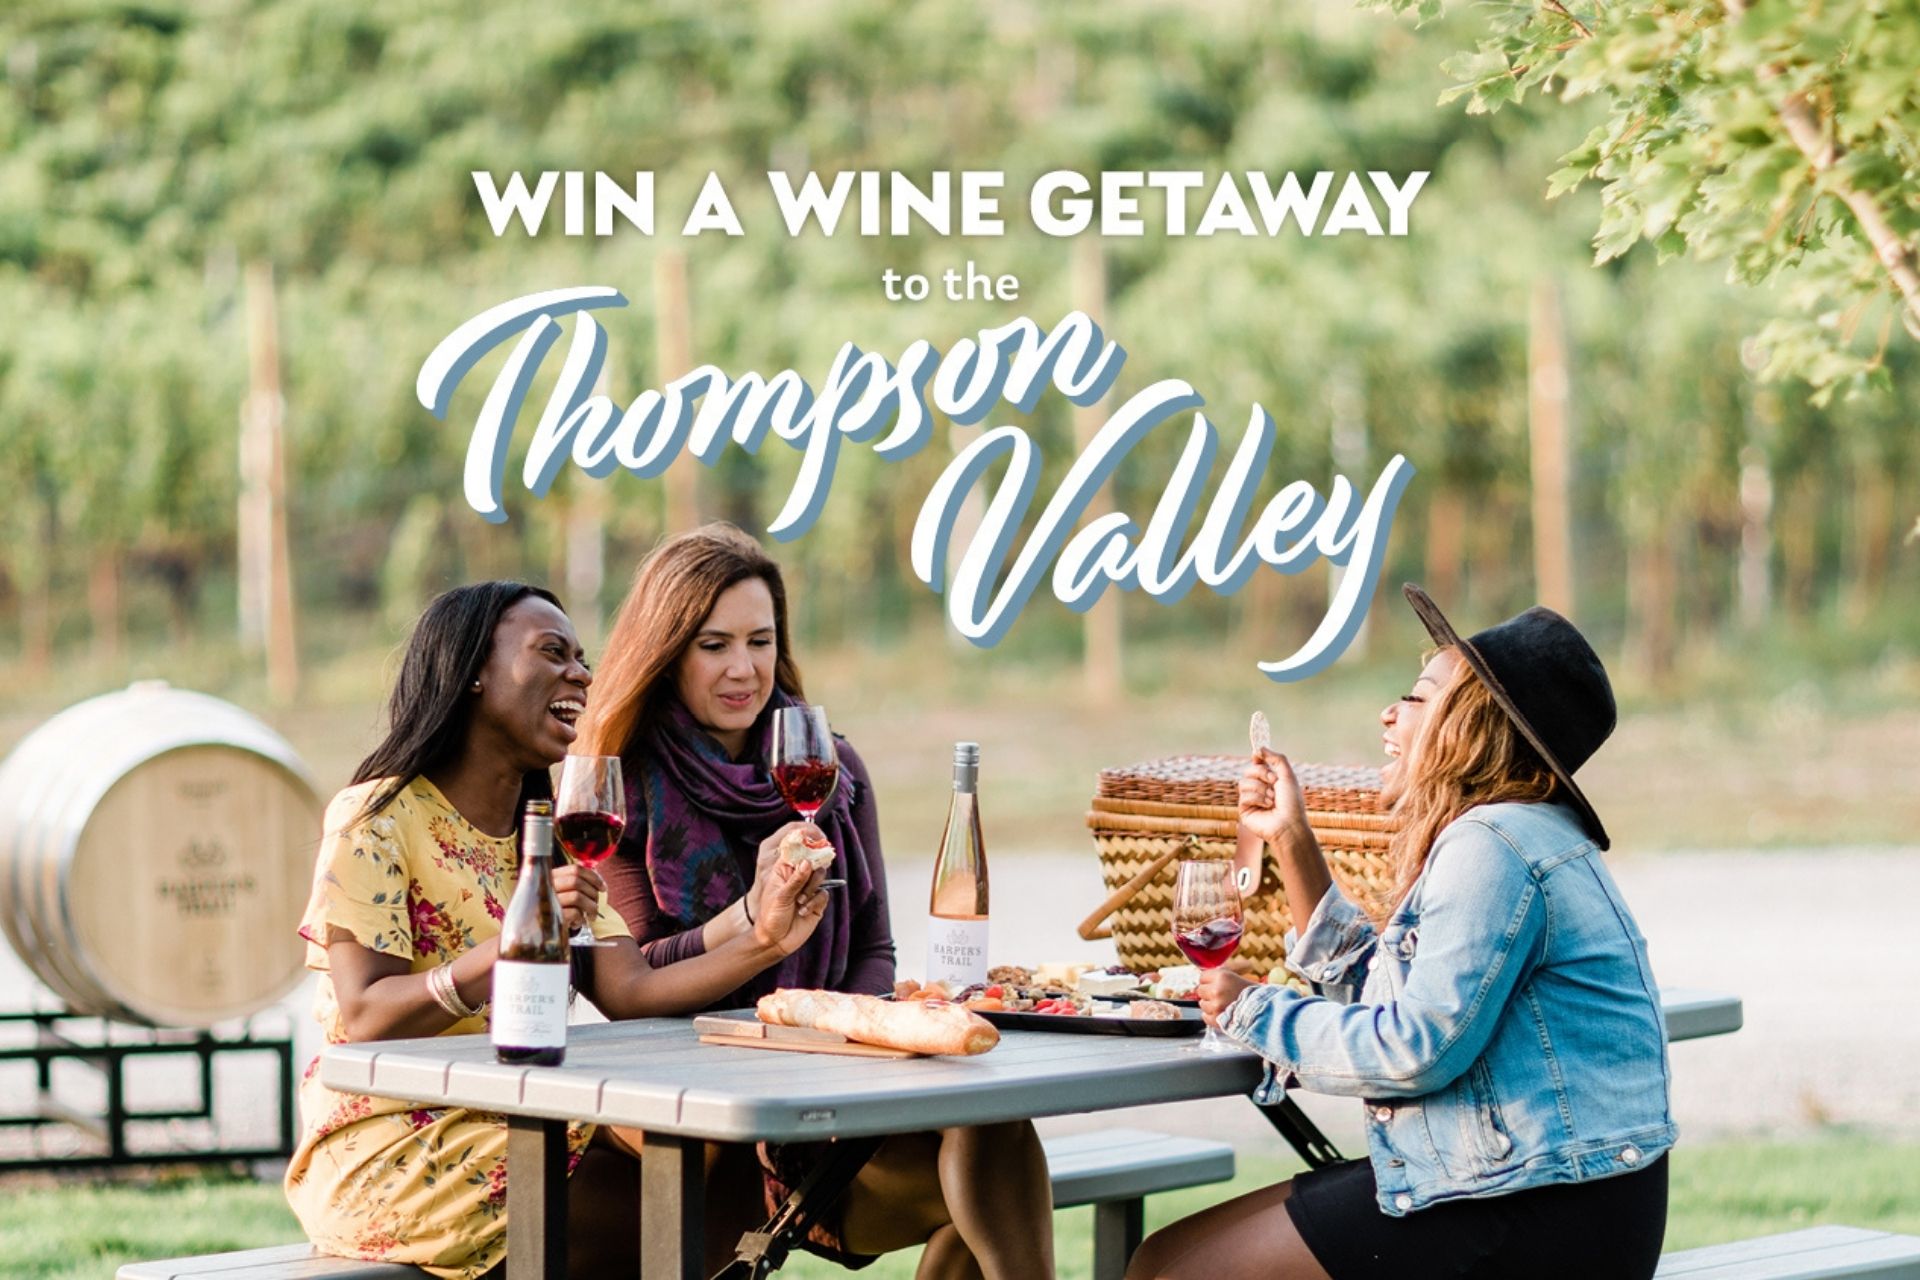 Enter to Win: a Wine Getaway to the Thompson Valley